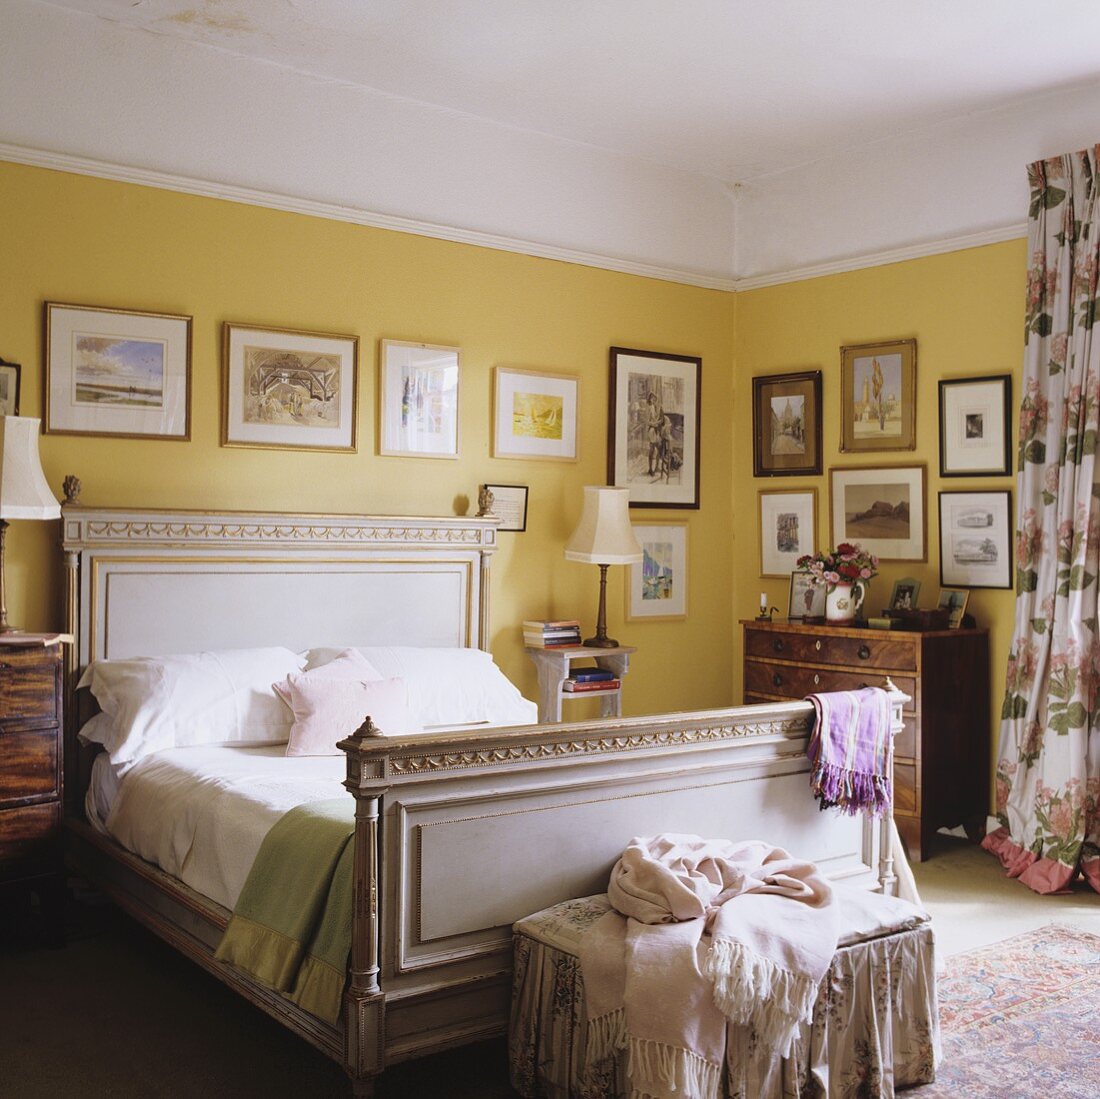 A bedroom in a country house with a white antique wooden bed and pictures hanging on a yellow wall